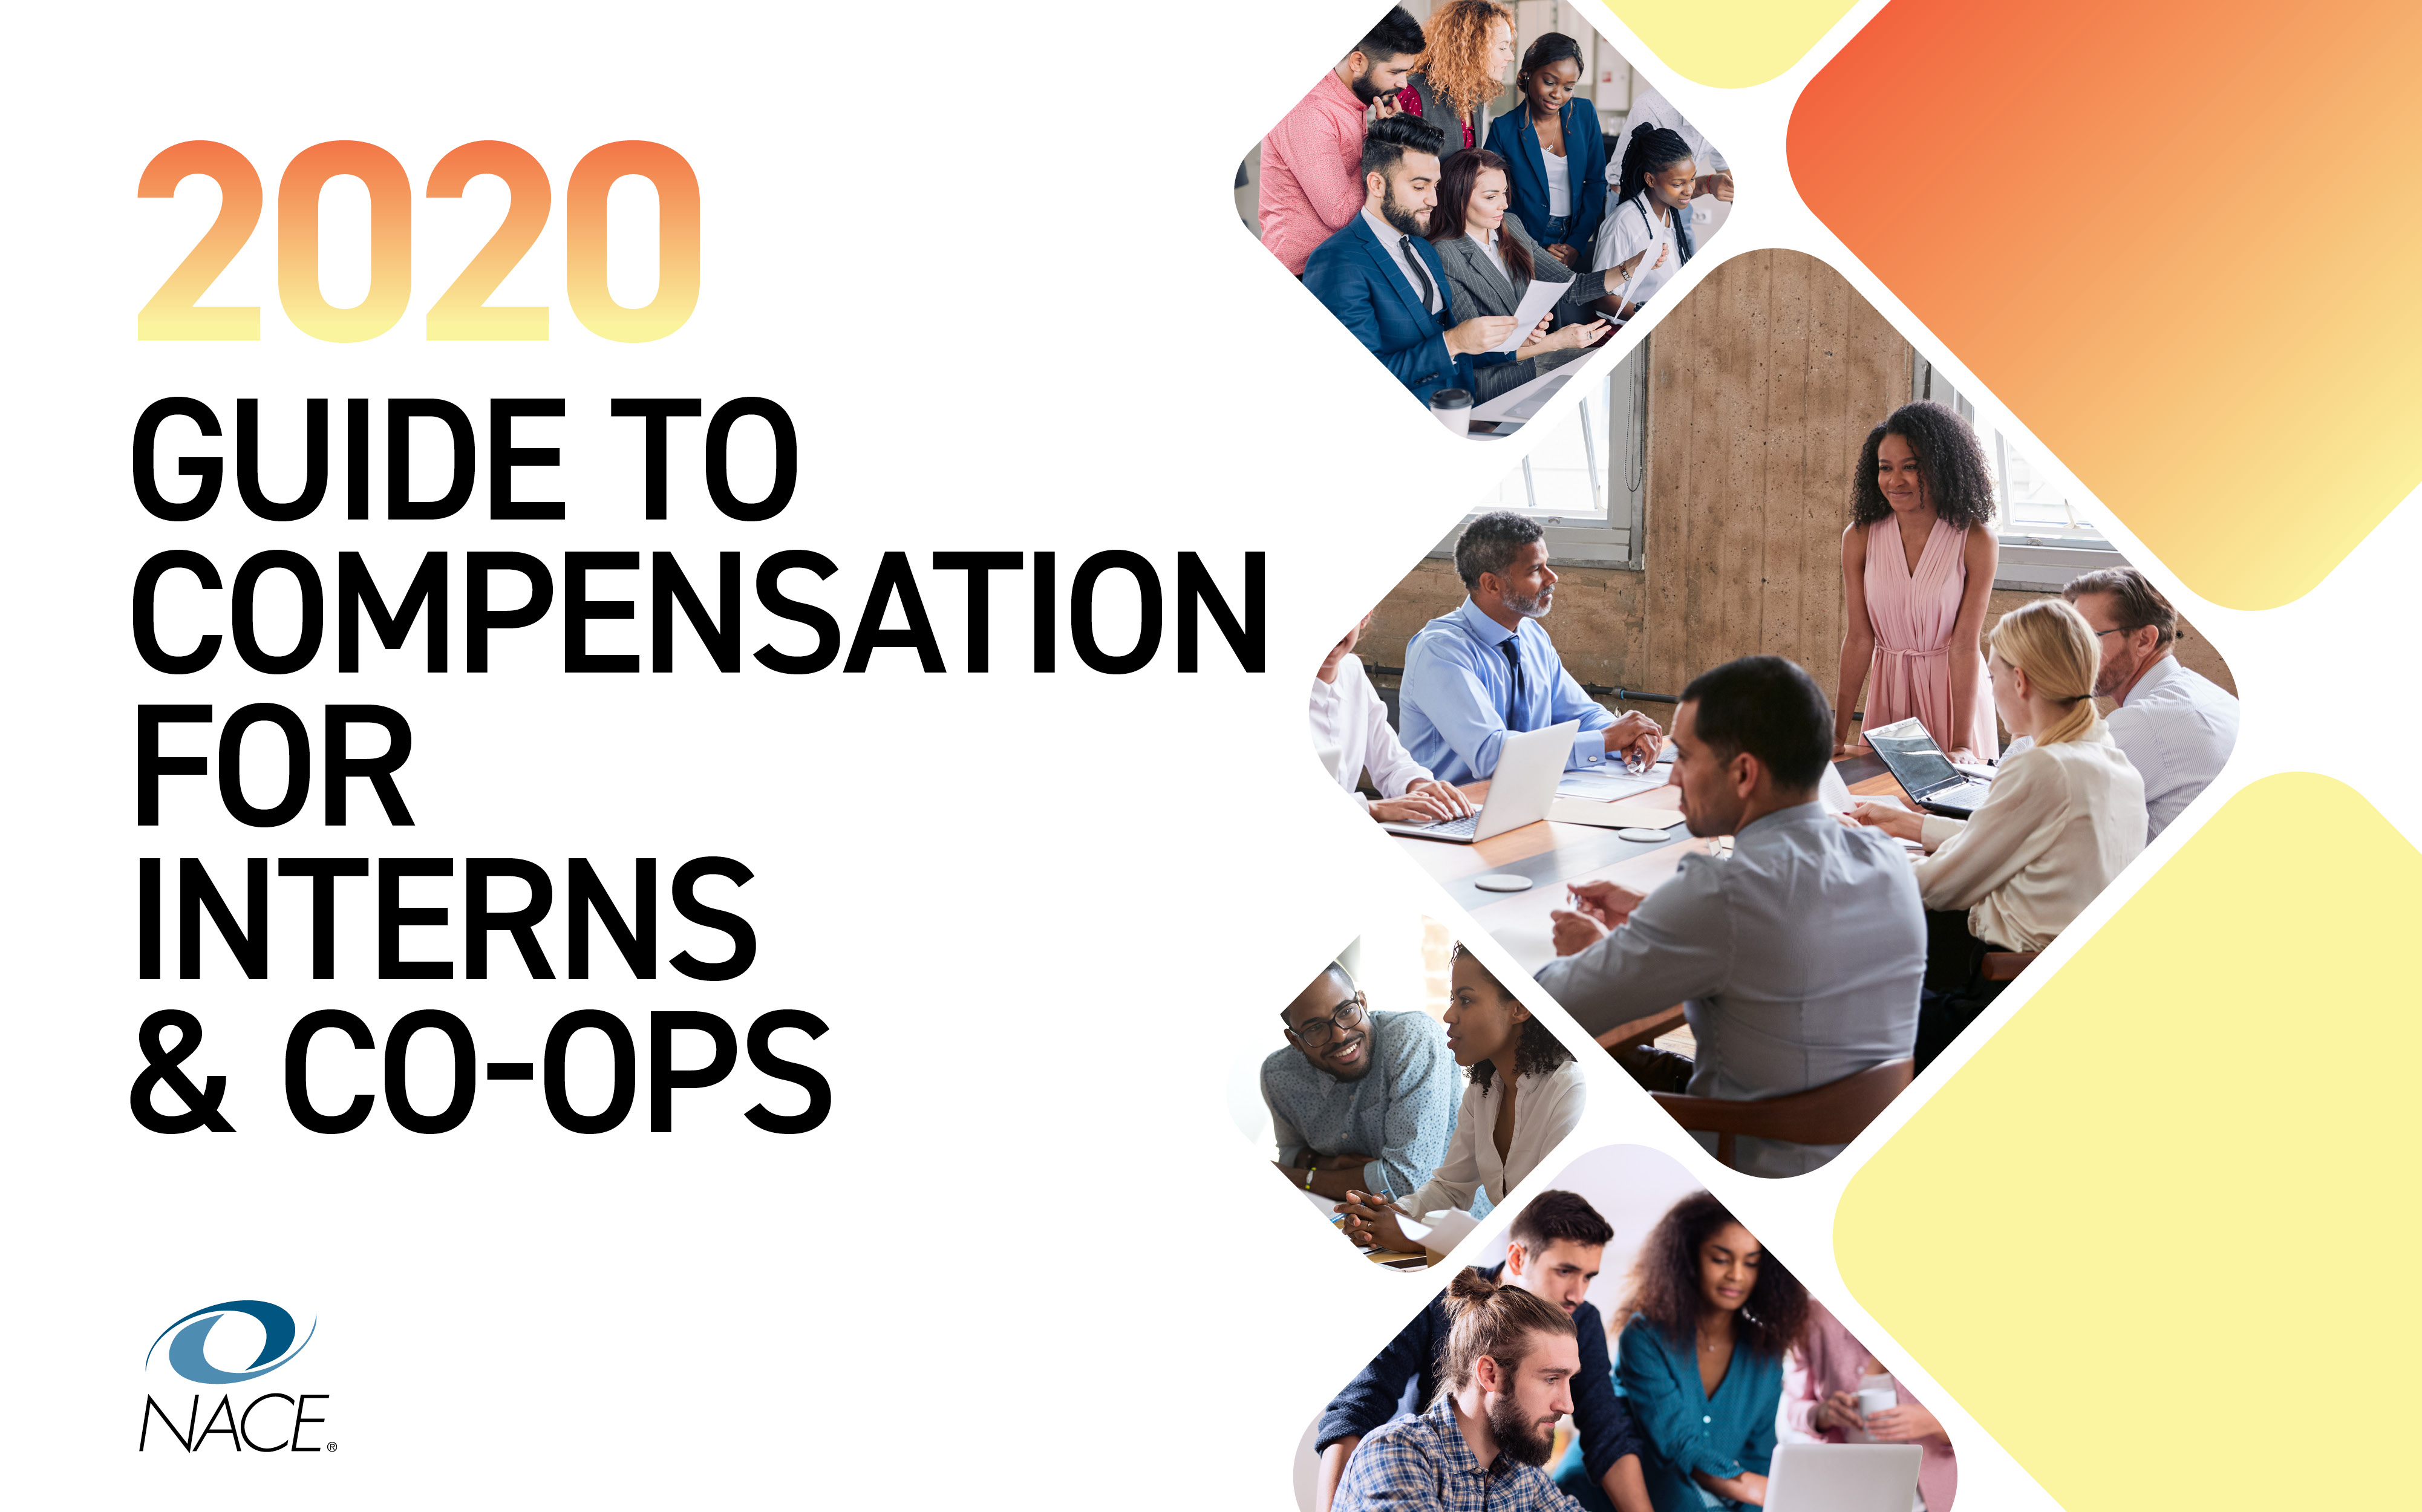 2020 NACE Guide to Compensation for Interns & Co-ops